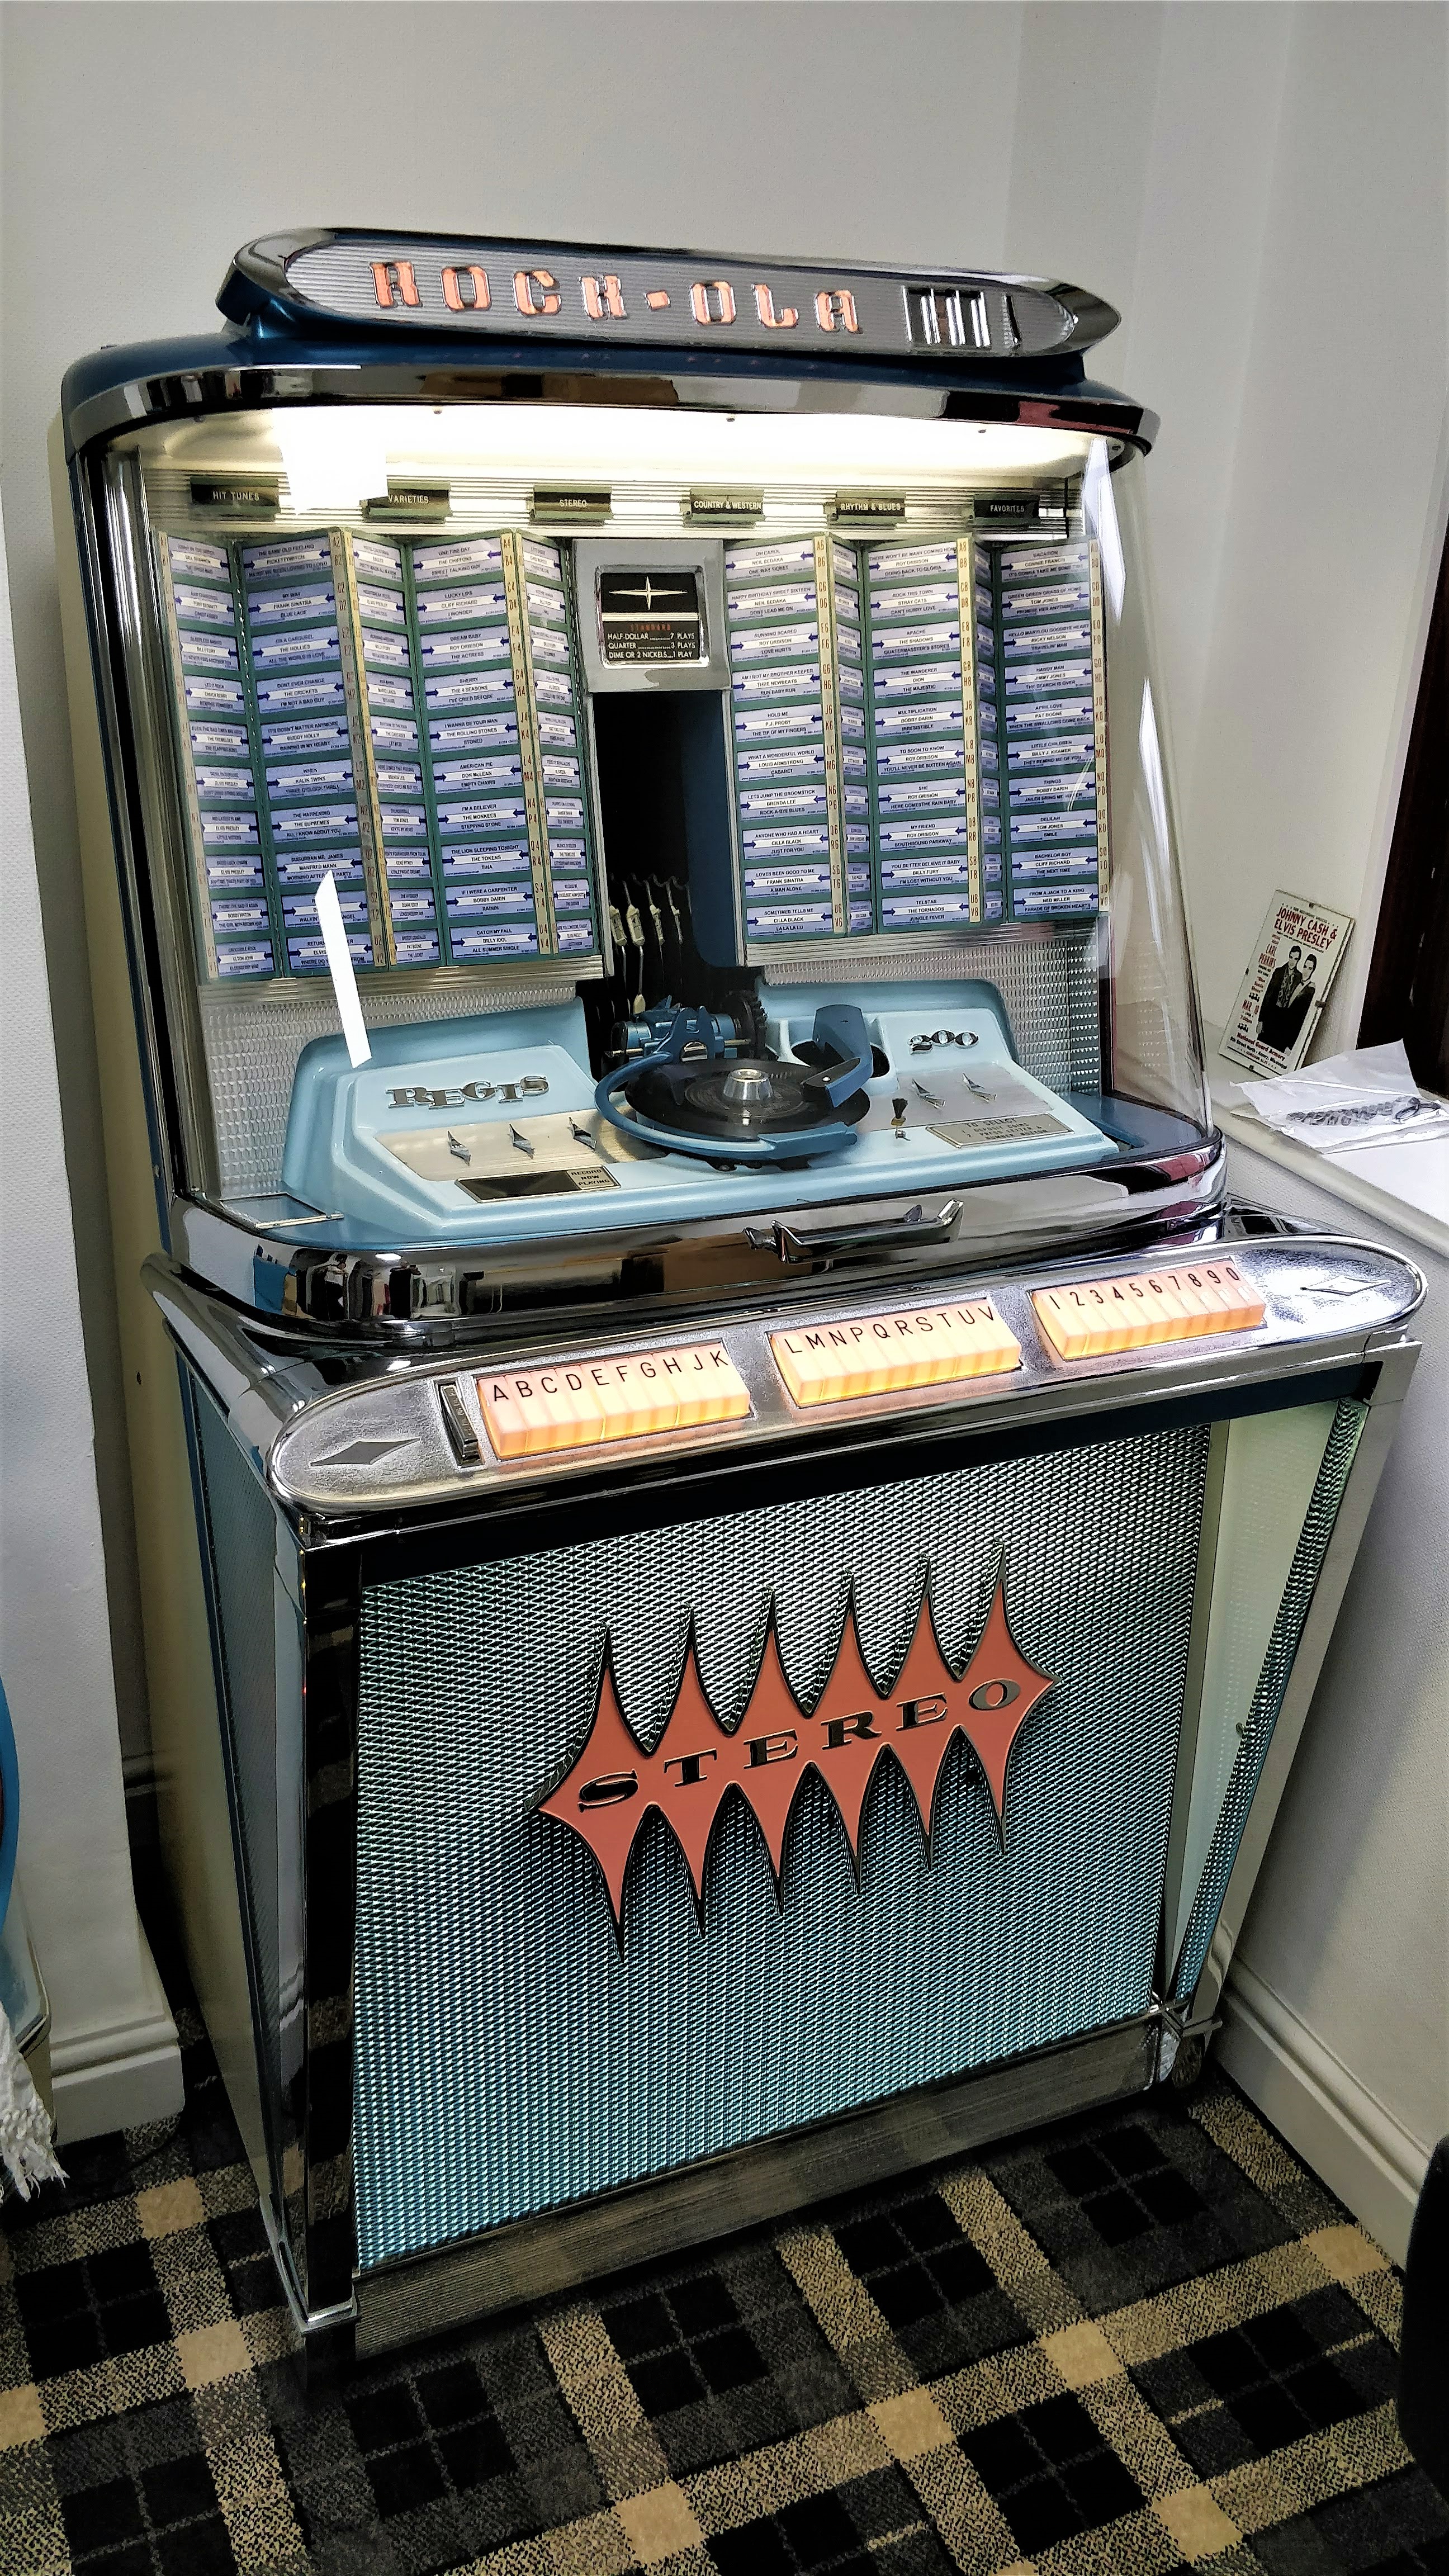 The Regis 200 Really Is A King Amongst Rock Ola Jukeboxes – The Jukebox ...